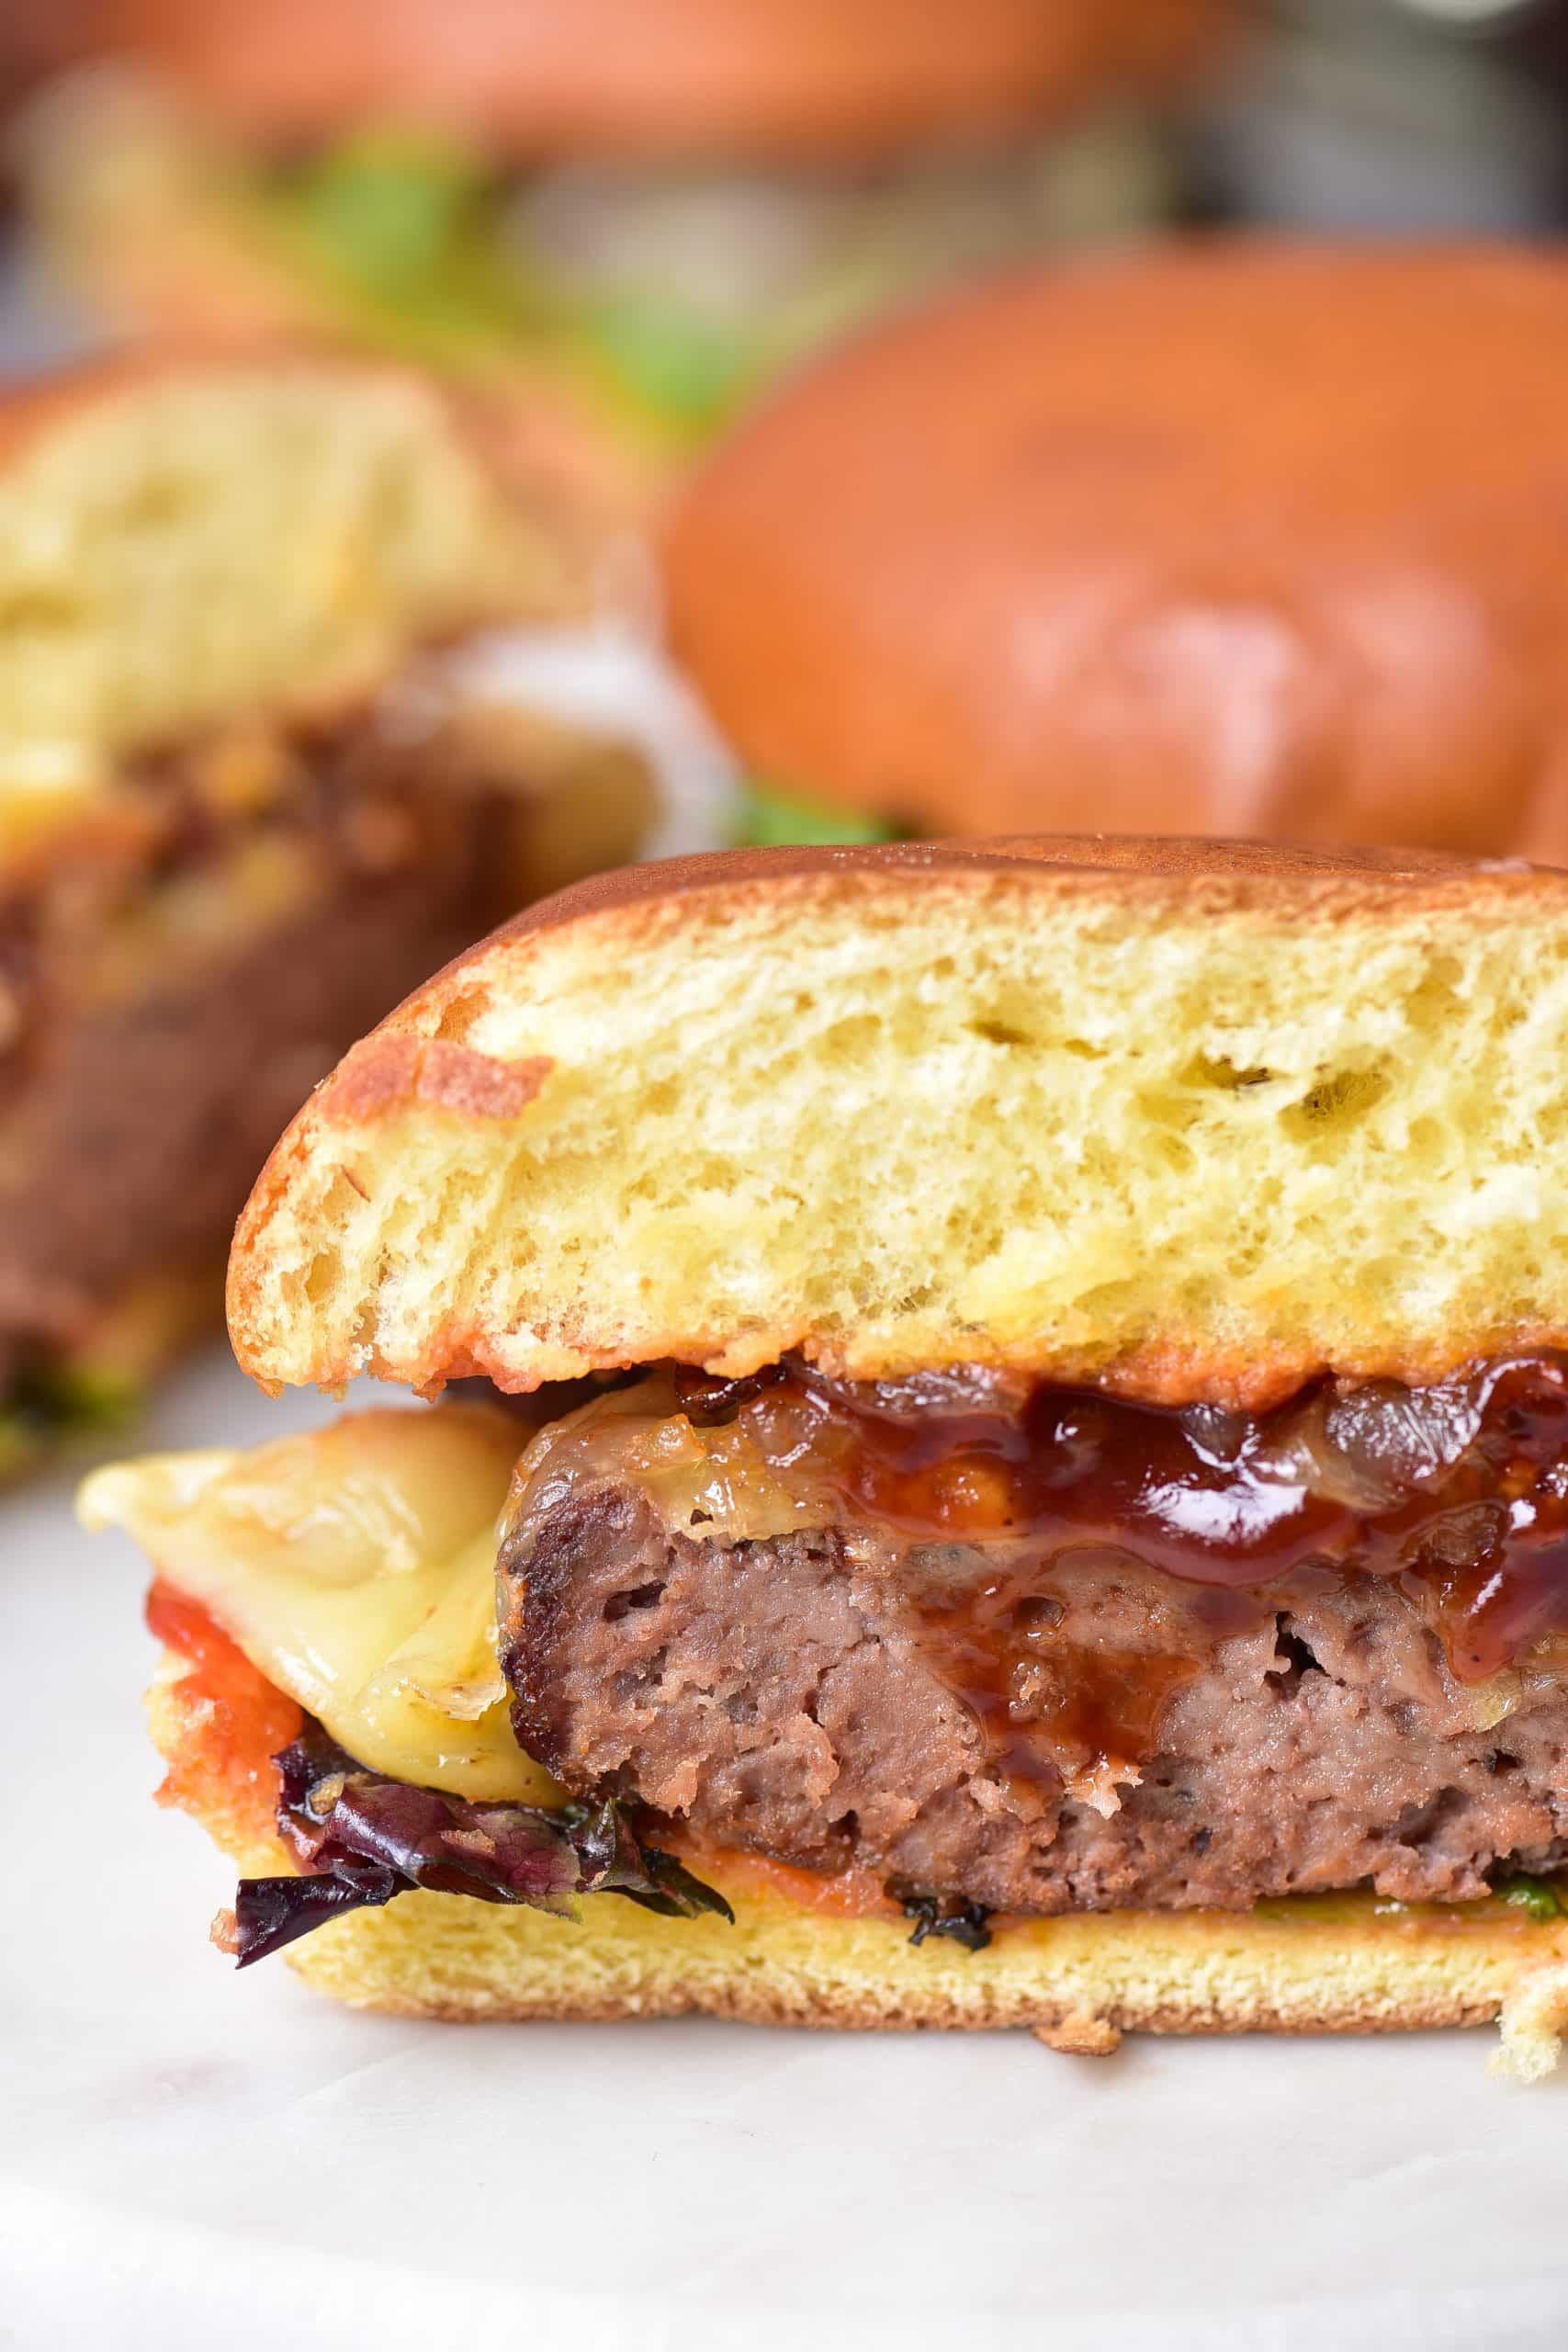 a close up image showing an air fryer burger cut in half with barbecue sauce oozing out the center on a marble cutting board